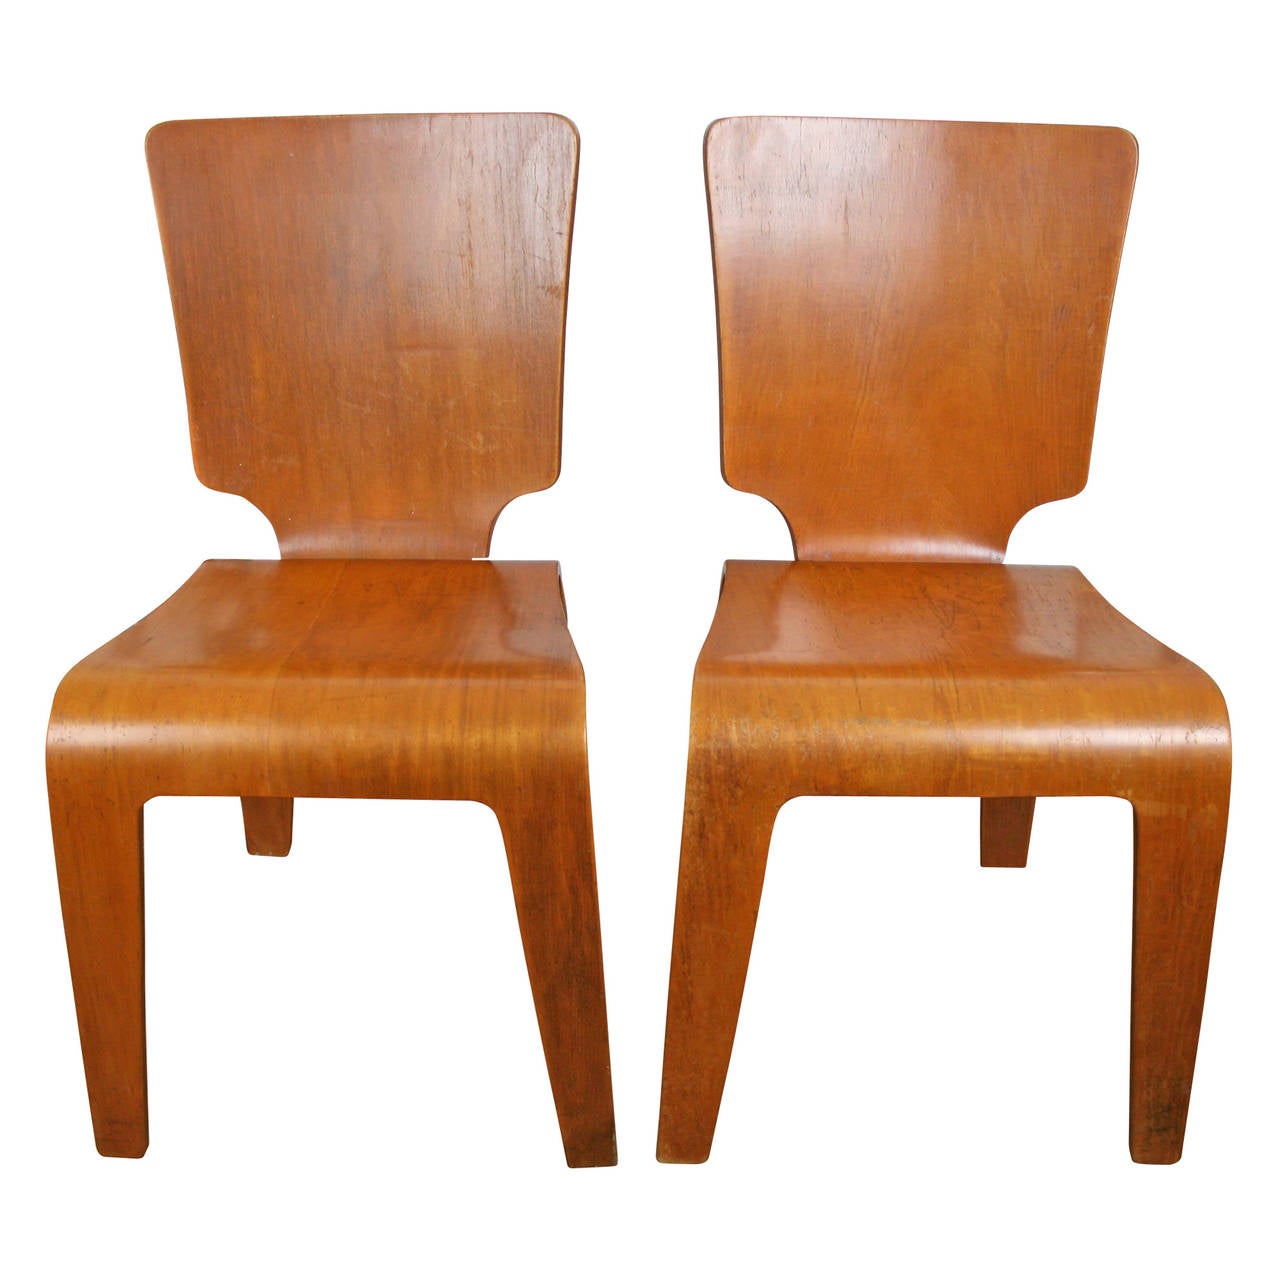 Like Charles Eames, Herbert Von Thaden began experimenting with molded plywood as a military resource during World War II. These handsome side chairs were an unexpected result. Made from bent plywood and veneered in amber-colored maple, this pair